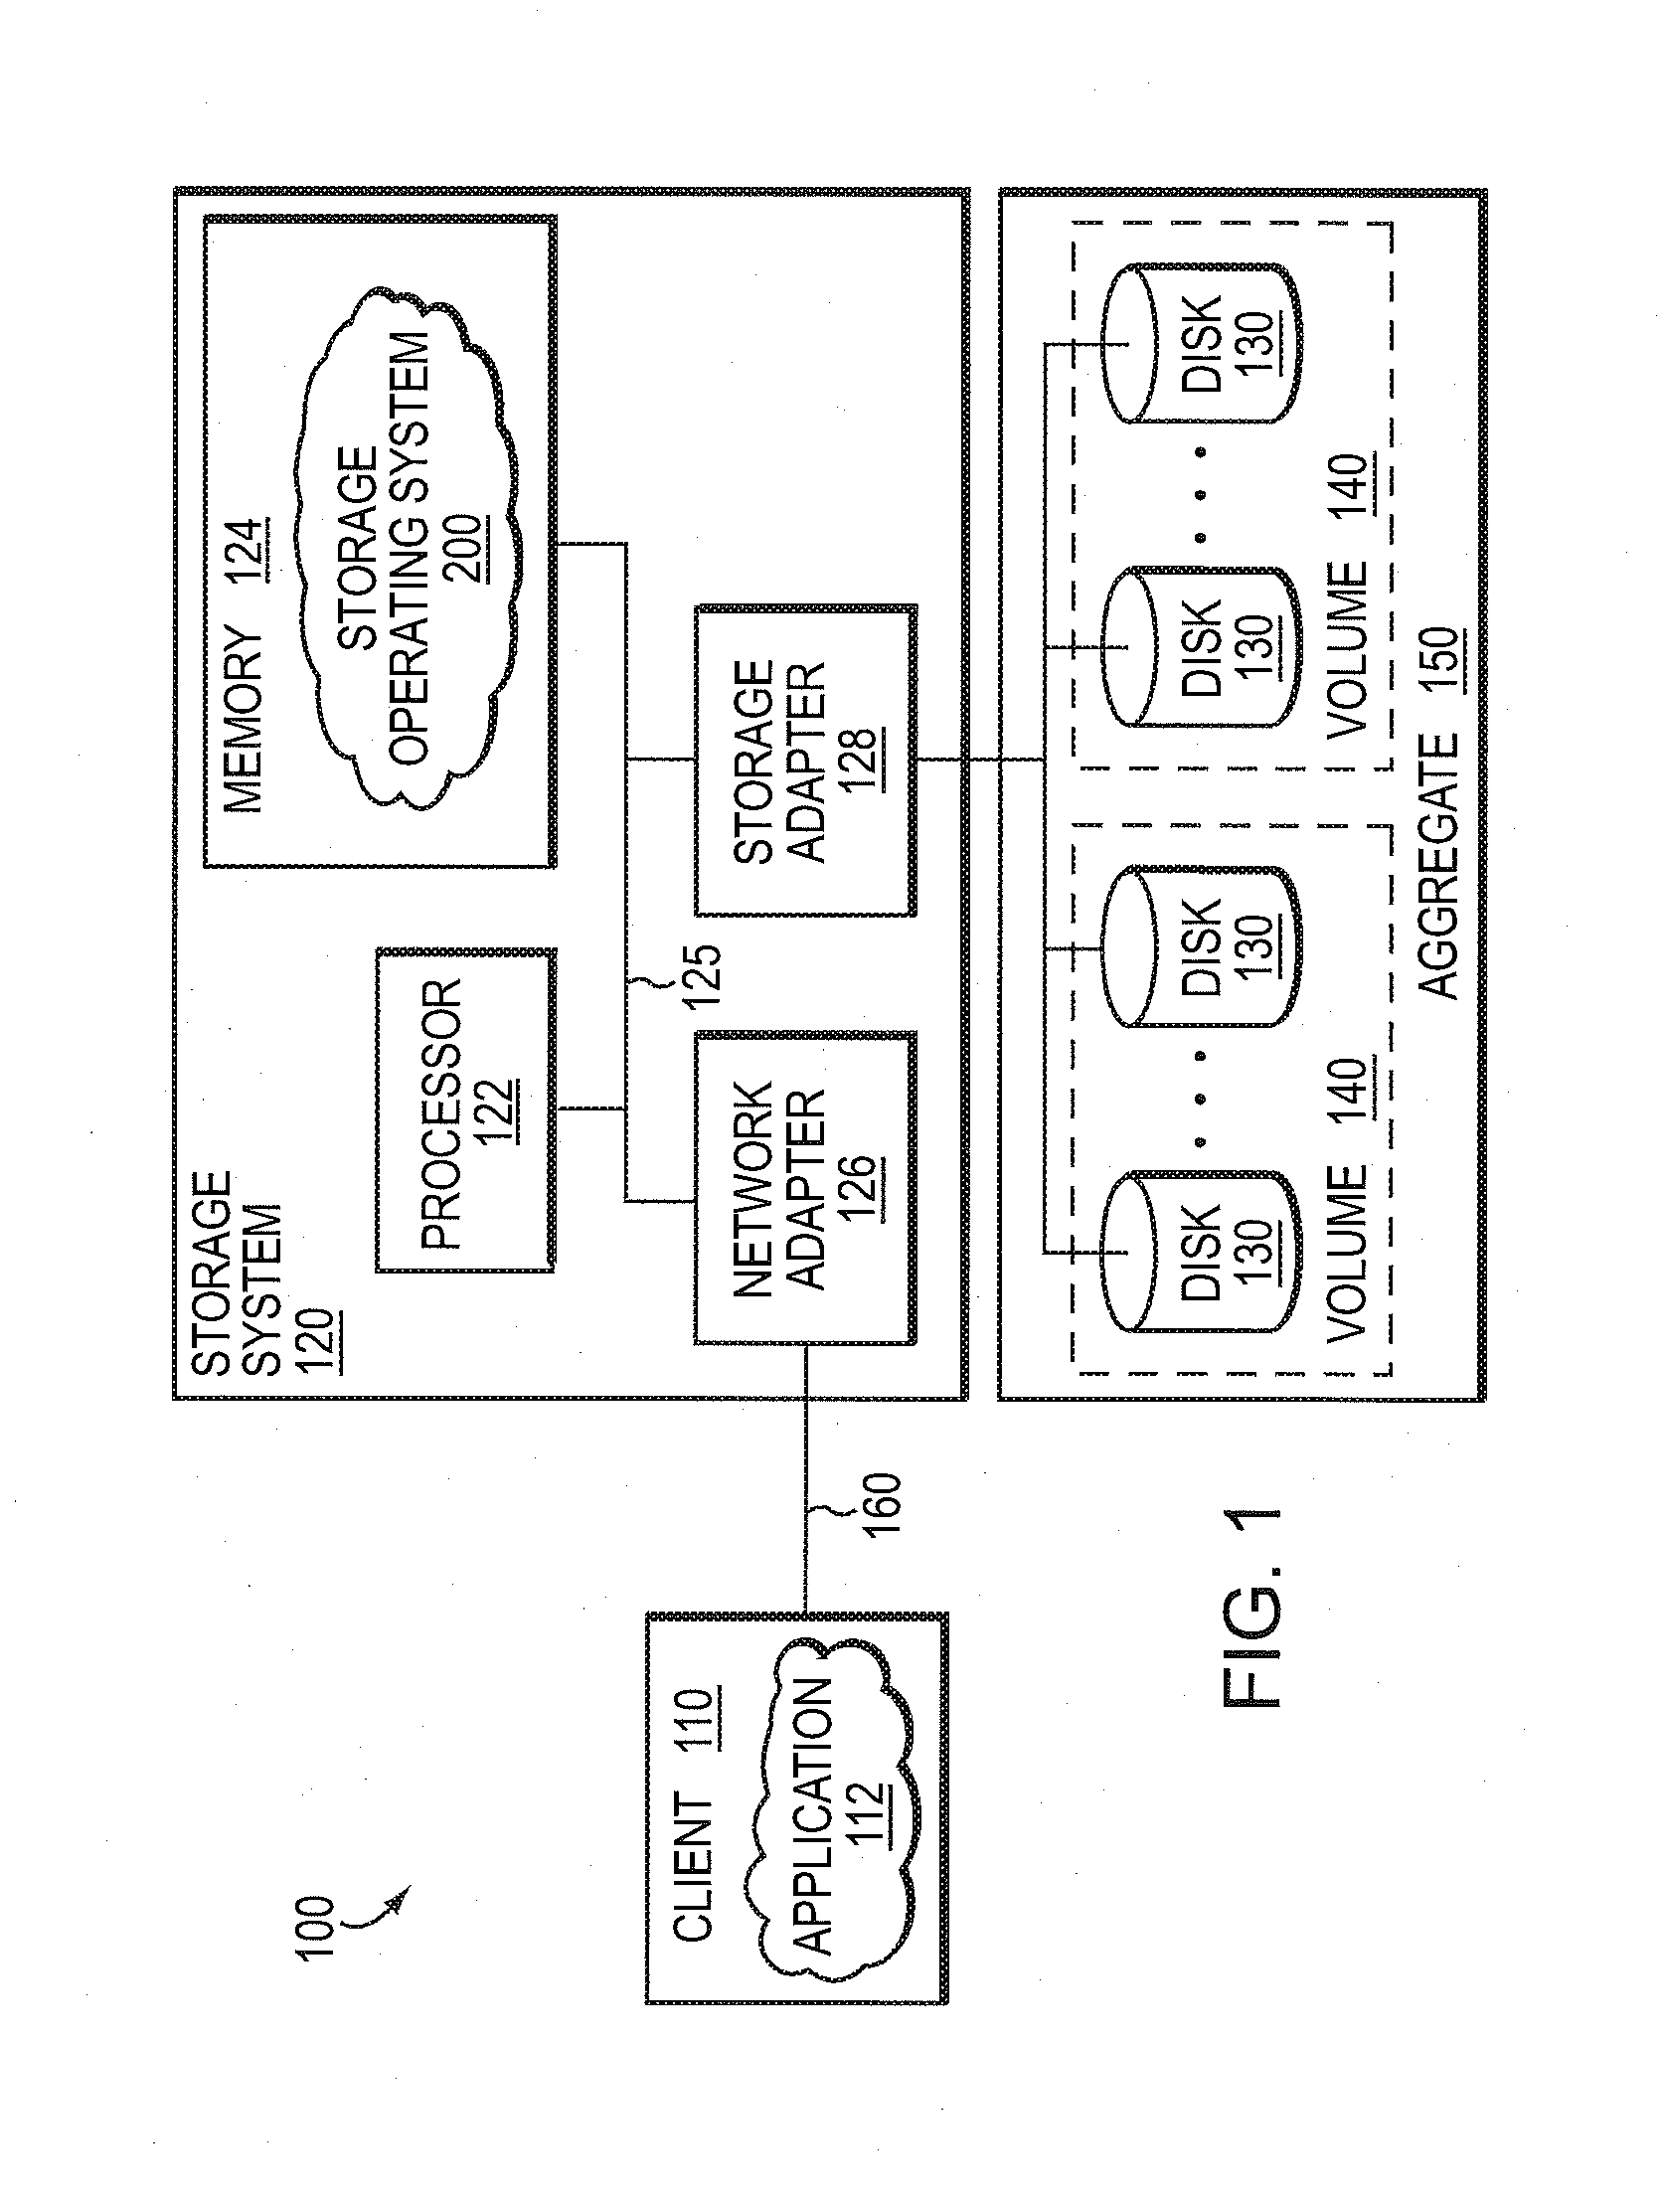 Maintaining snapshot and active file system metadata in an on-disk structure of a fle system